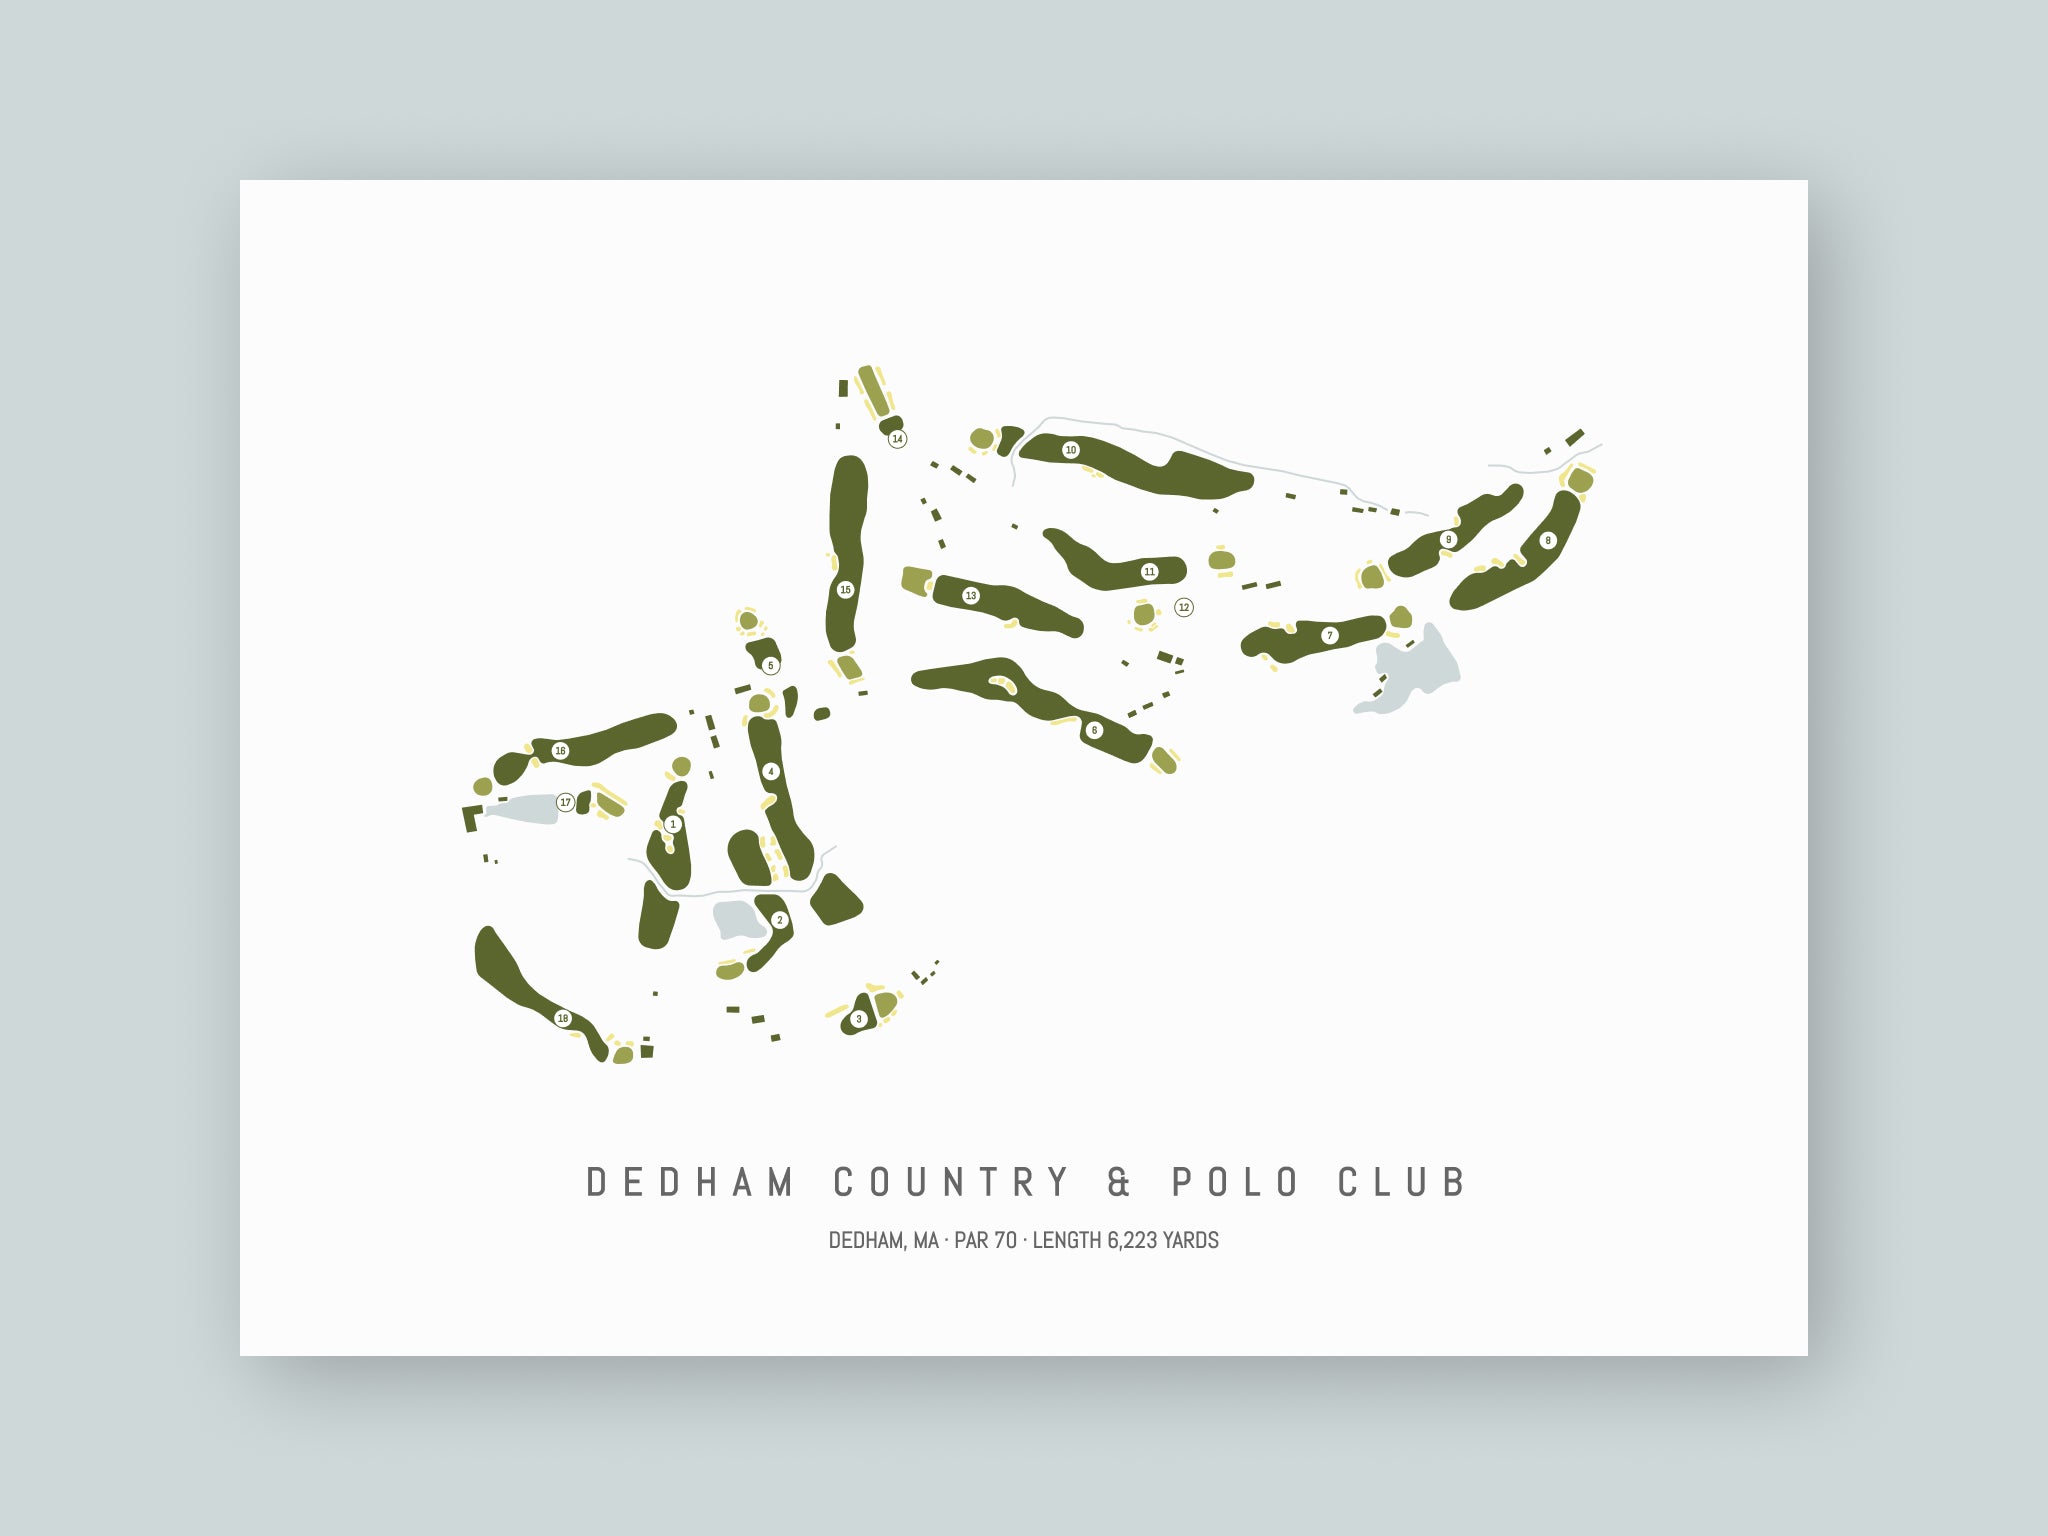 Dedham-Country-And-Polo-Club-MA--Unframed-24x18-With-Hole-Numbers